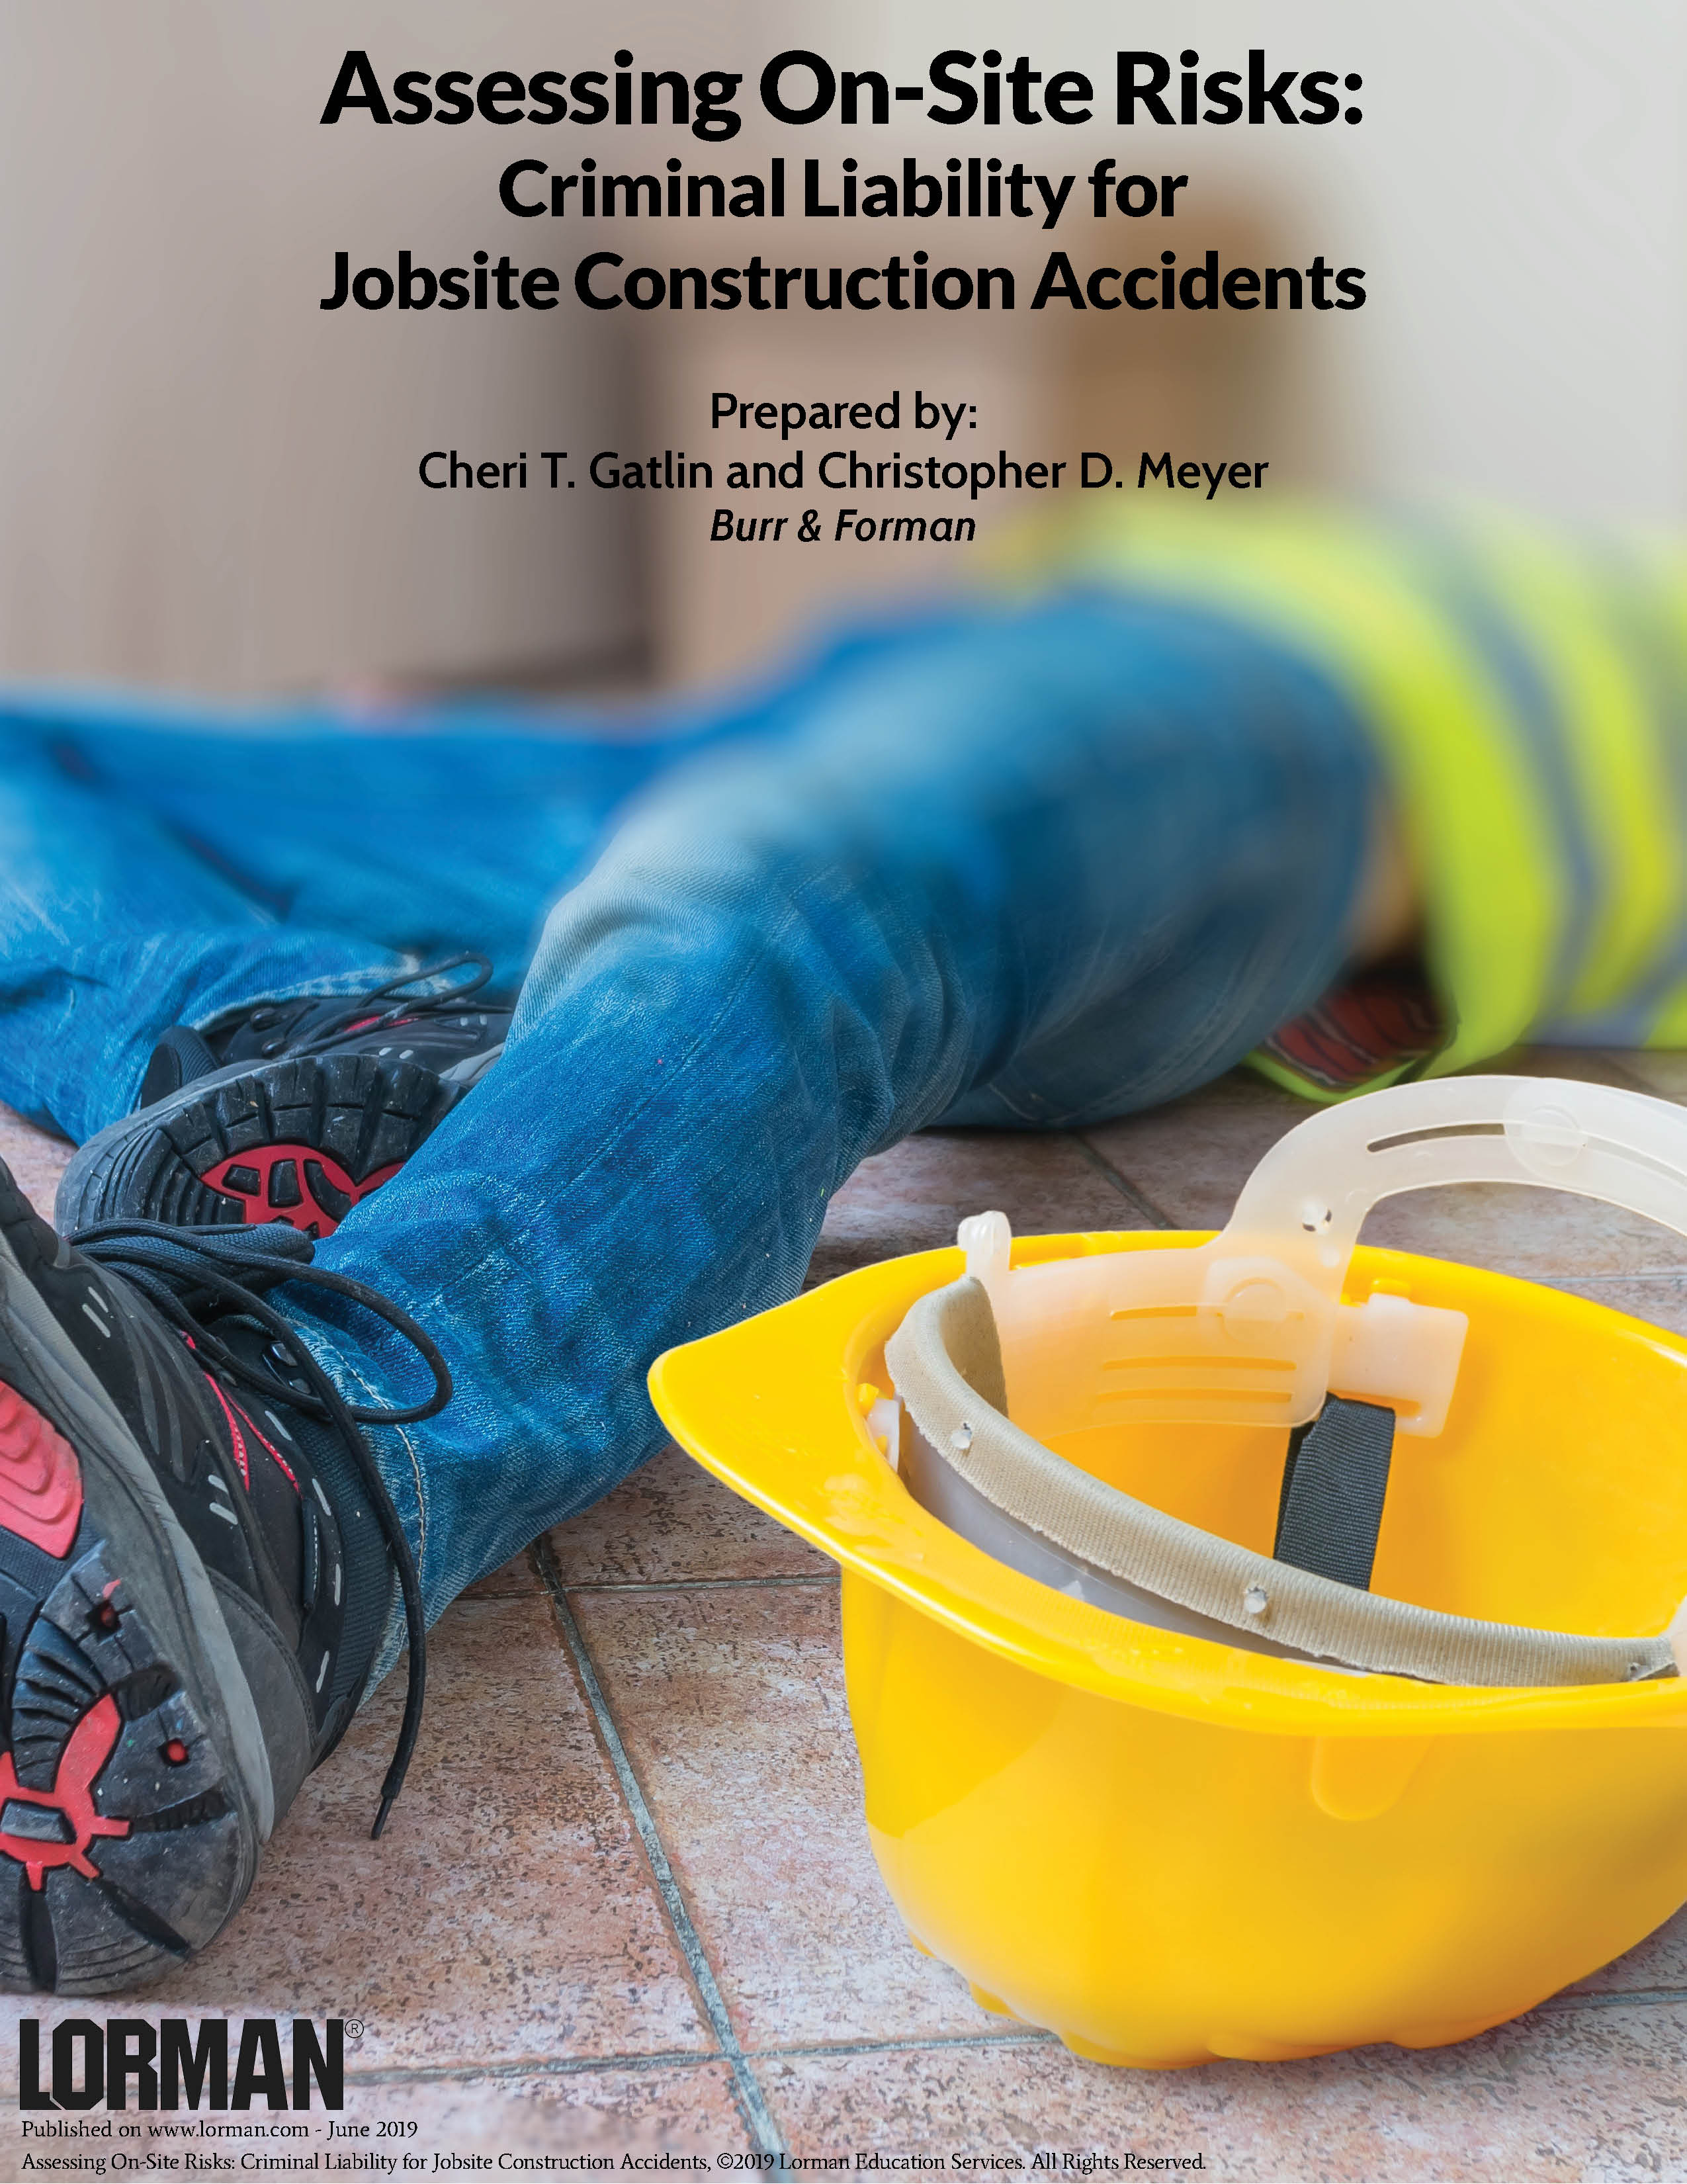 Assessing On-Site Risks: Criminal Liability for Jobsite Construction Accidents